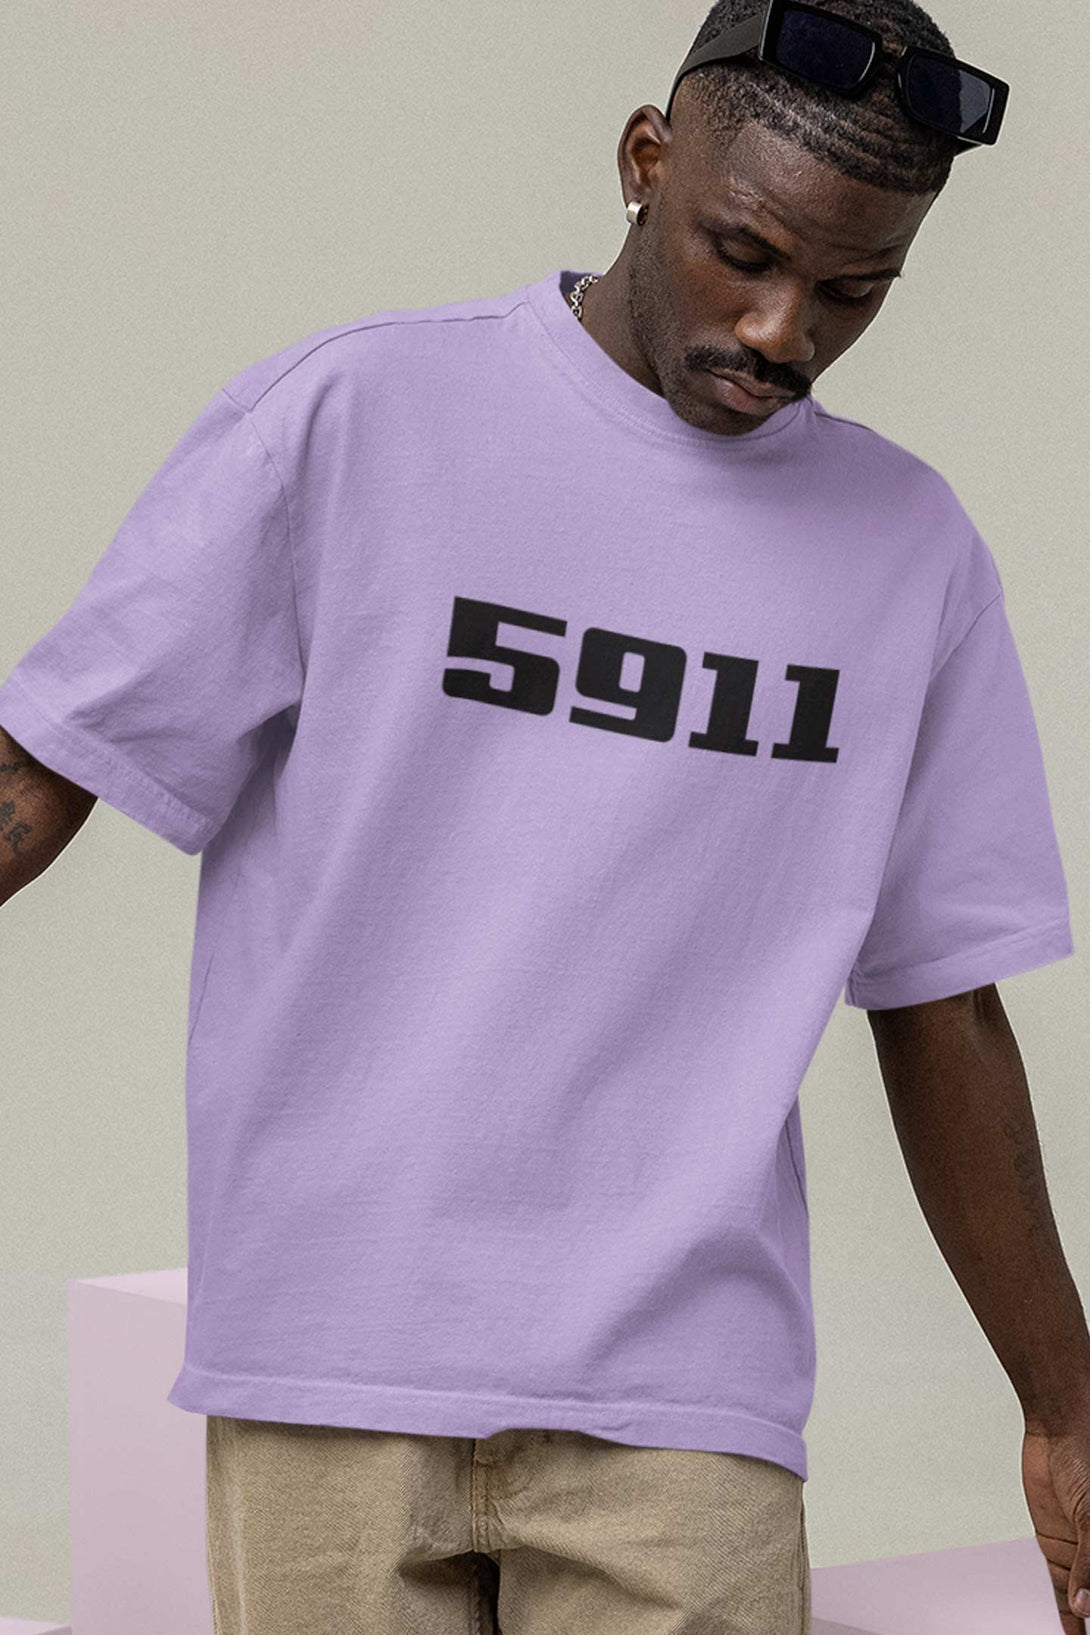 5911 printed on front of Lavender Color Oversized T-shirt